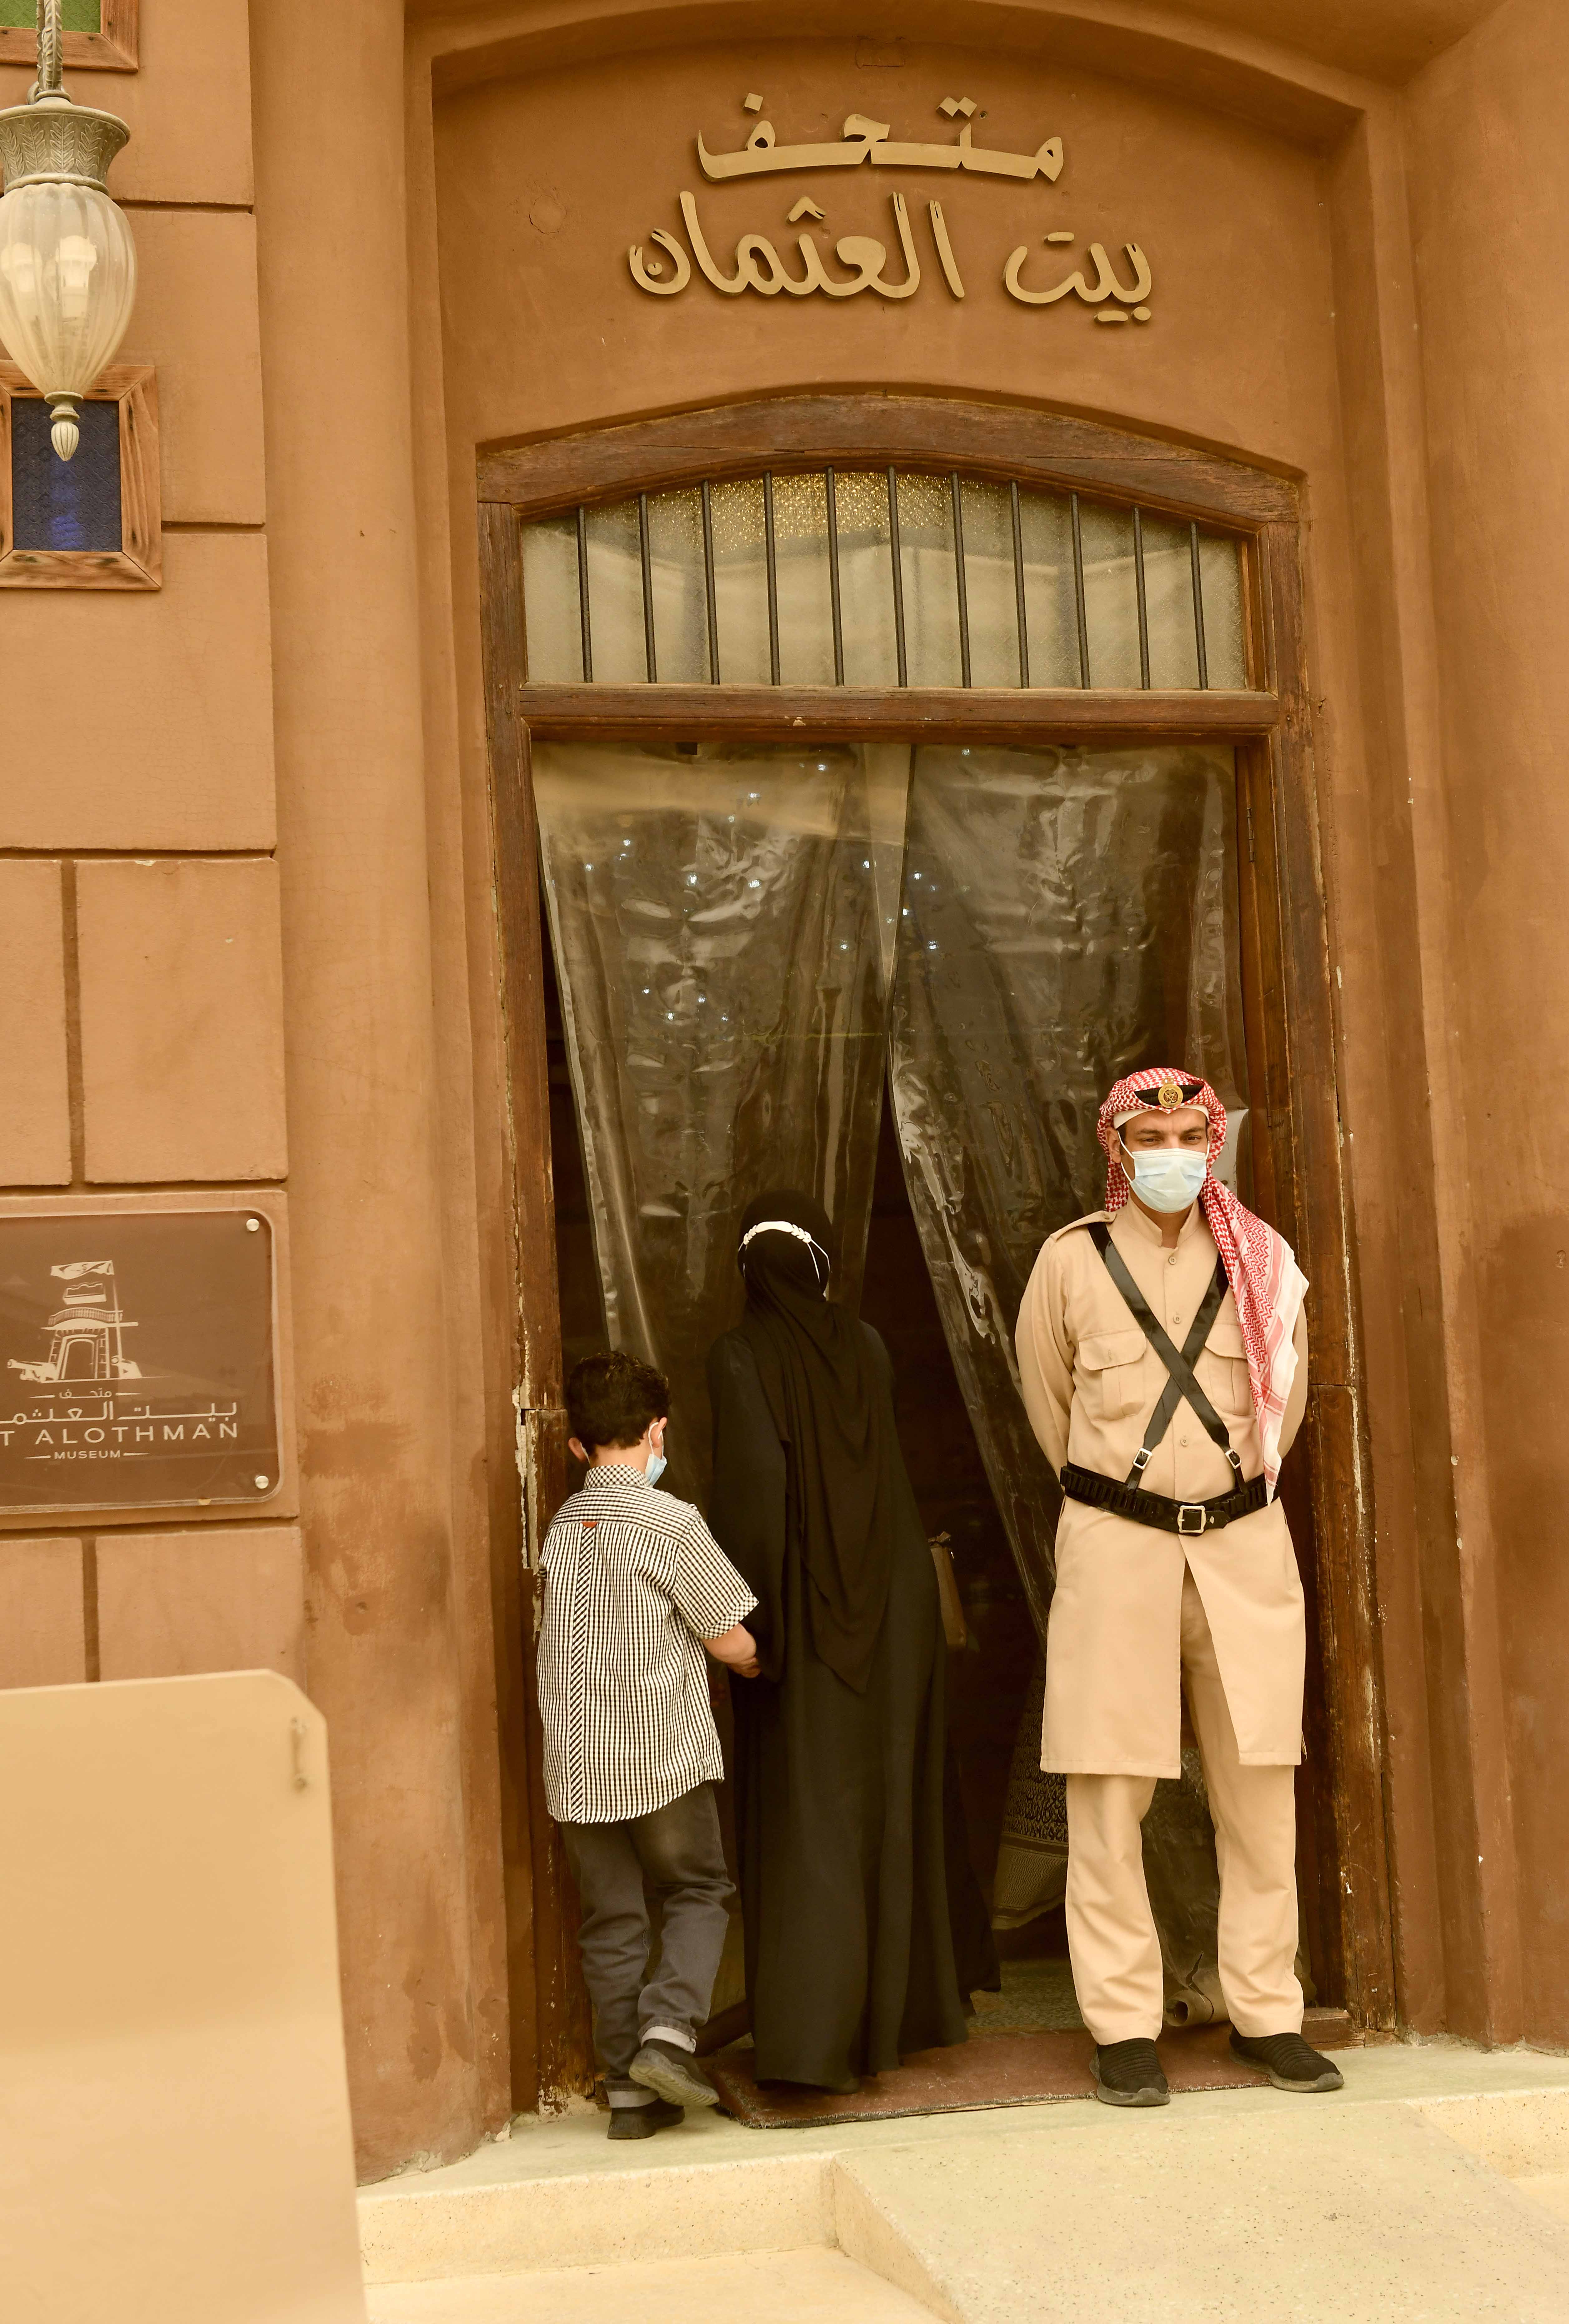 Bait Al Othman Museum opened for the public after closing down because of the pandemic